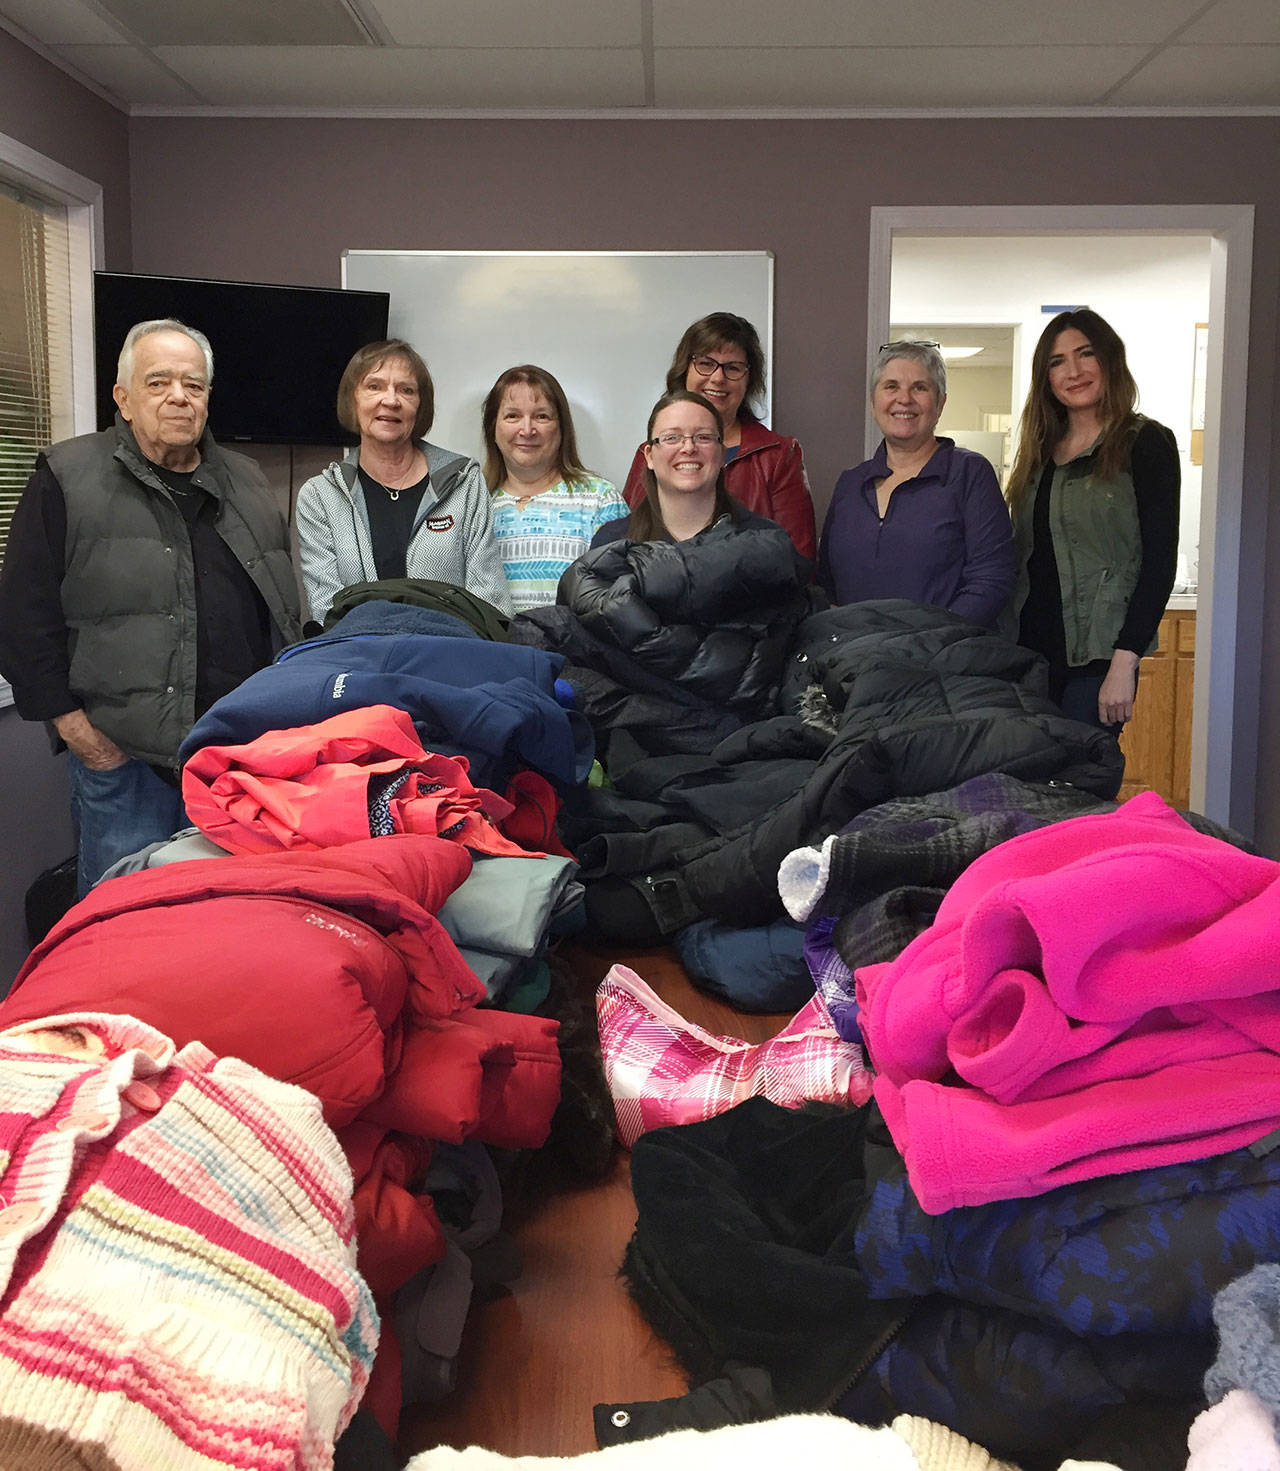 Windermere Real Estate offices in Sequim and Port Angeles are collecting coats this October for those in need. So far they have collected more than 140 coats as well as many hats, gloves and scarves. Their goal: collect 300 coats by the end of the drive on Oct. 31, which will be donated to the Boys & Girls Club and the Sequim Seventh Day Adventist’s Free Clothing Closet as well as The Answer for Youth (TAFY) in Port Angeles. New or lightly used coats, hats or gloves in any size may be dropped off between 9 a.m.-5 p.m., Monday-Friday at one of two Windermere offices — Windermere Real Estate/Sequim-East, 842 E. Washington St., or Windermere Real Estate/Sunland, 137 Fairway Dr. — or the Windermere Real Estate/Port Angeles office at 711 E. Front St., Port Angeles. Pictured, from left, are Dave Sharman, Carol Dana, Sheryl Payseno Burley, Jessica Warriner, Dianna DaSilva, Madeleine Burns and Kylie Walters of Windermere Real Estate/Sequim-East. Submitted photo